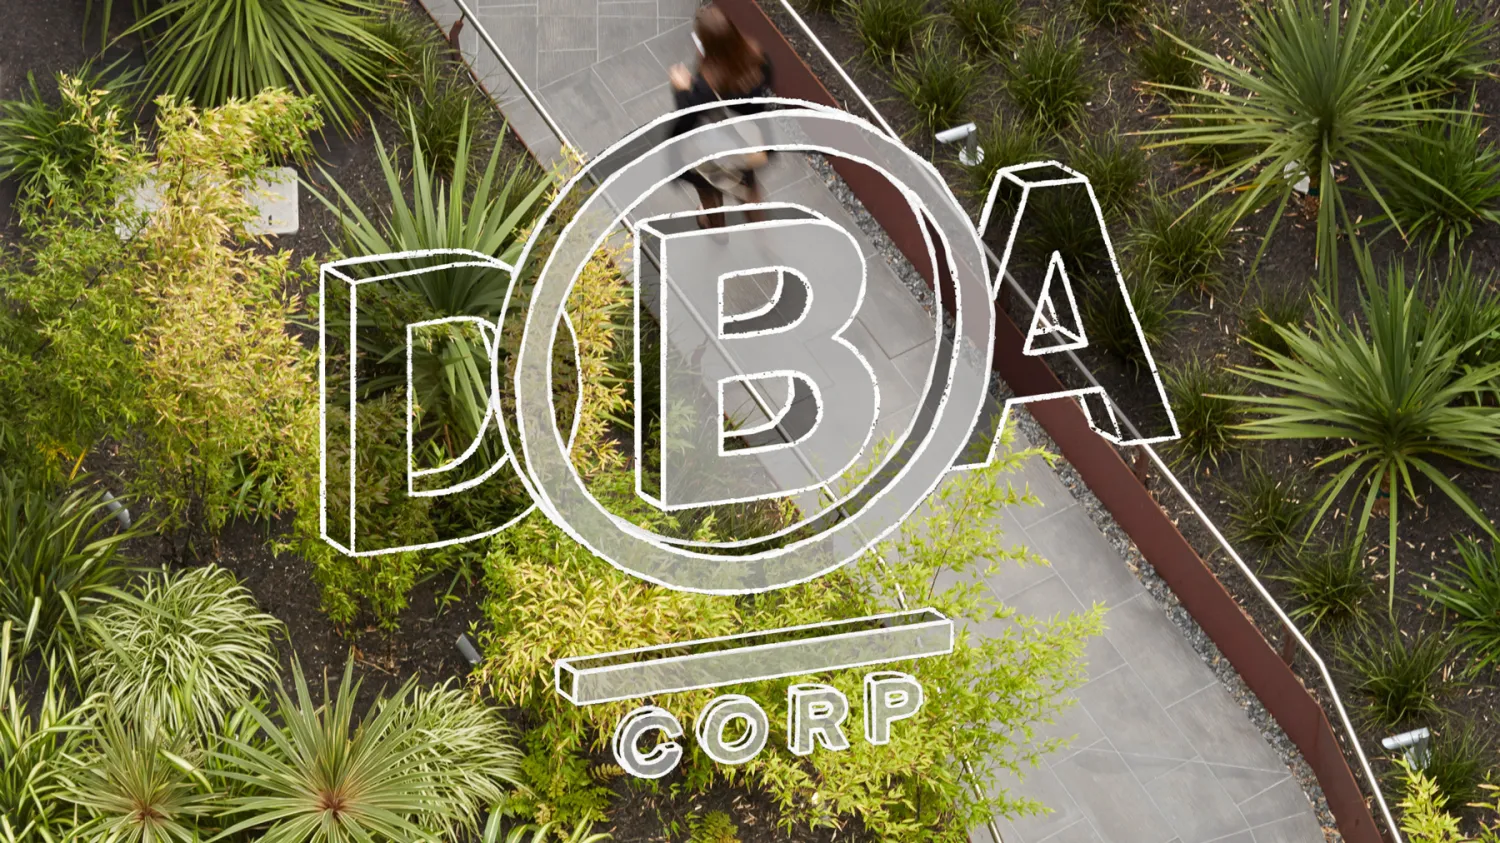 Text: "DBA B Corp" with a background of a bike path and plants.